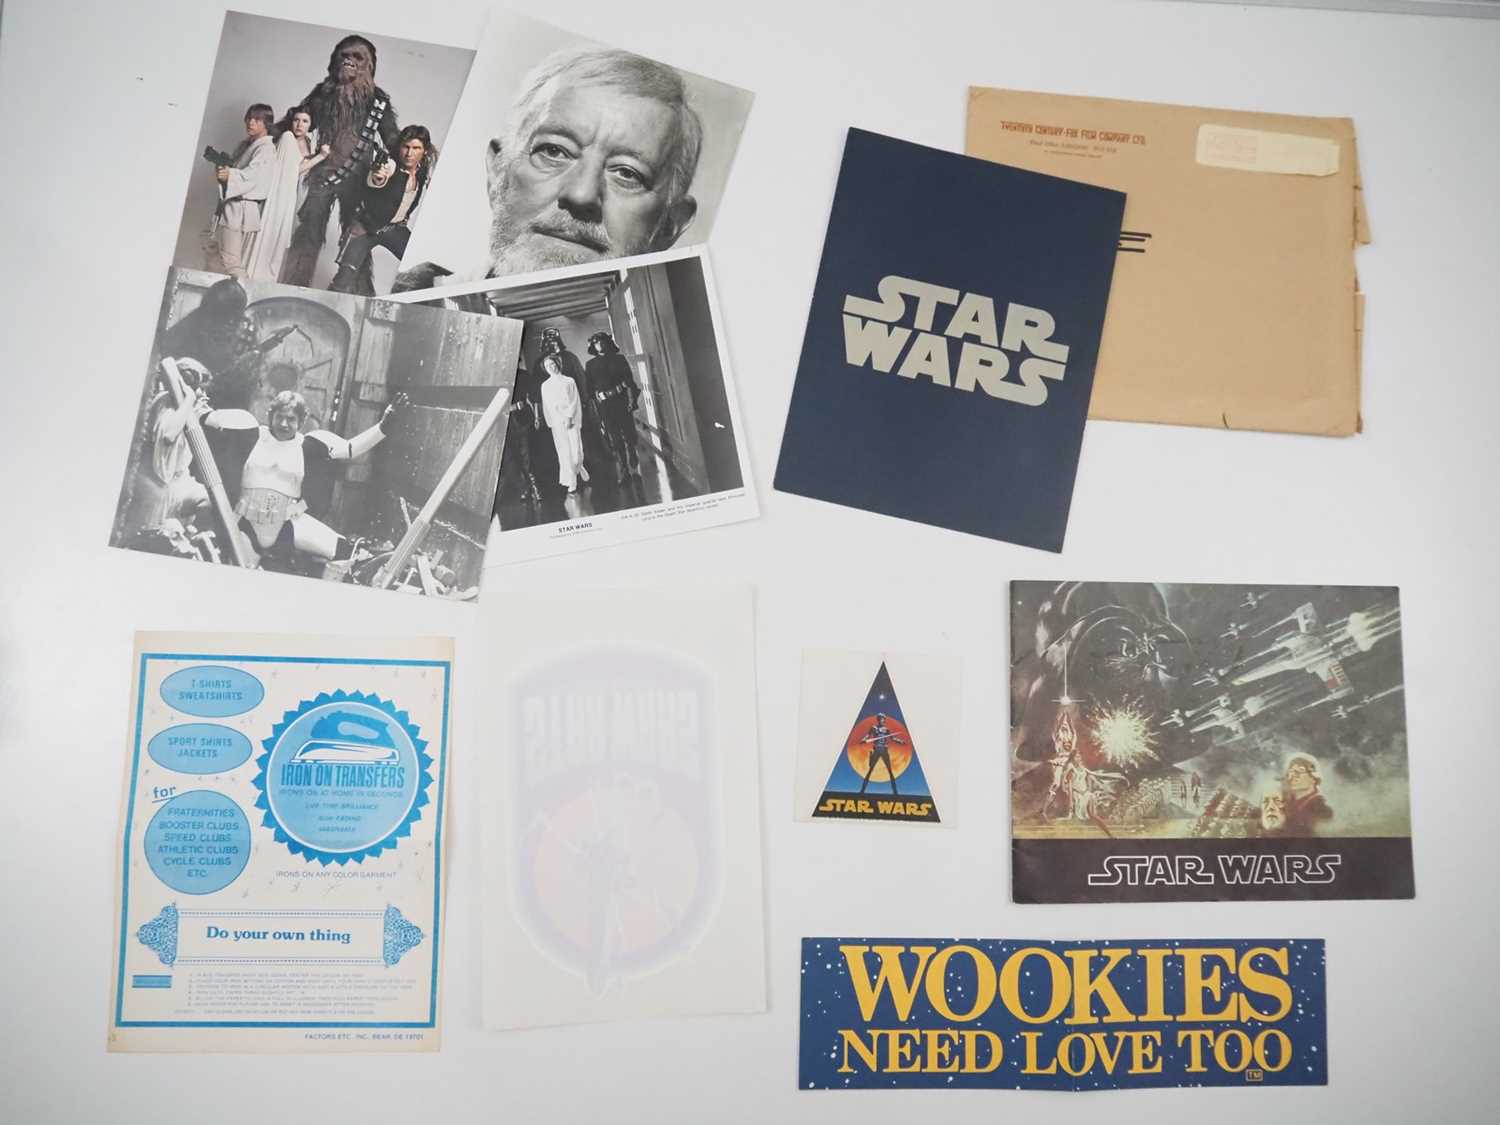 STAR WARS - An original fan club pack as sent out in January 1978 containing rare unused iron-on X-